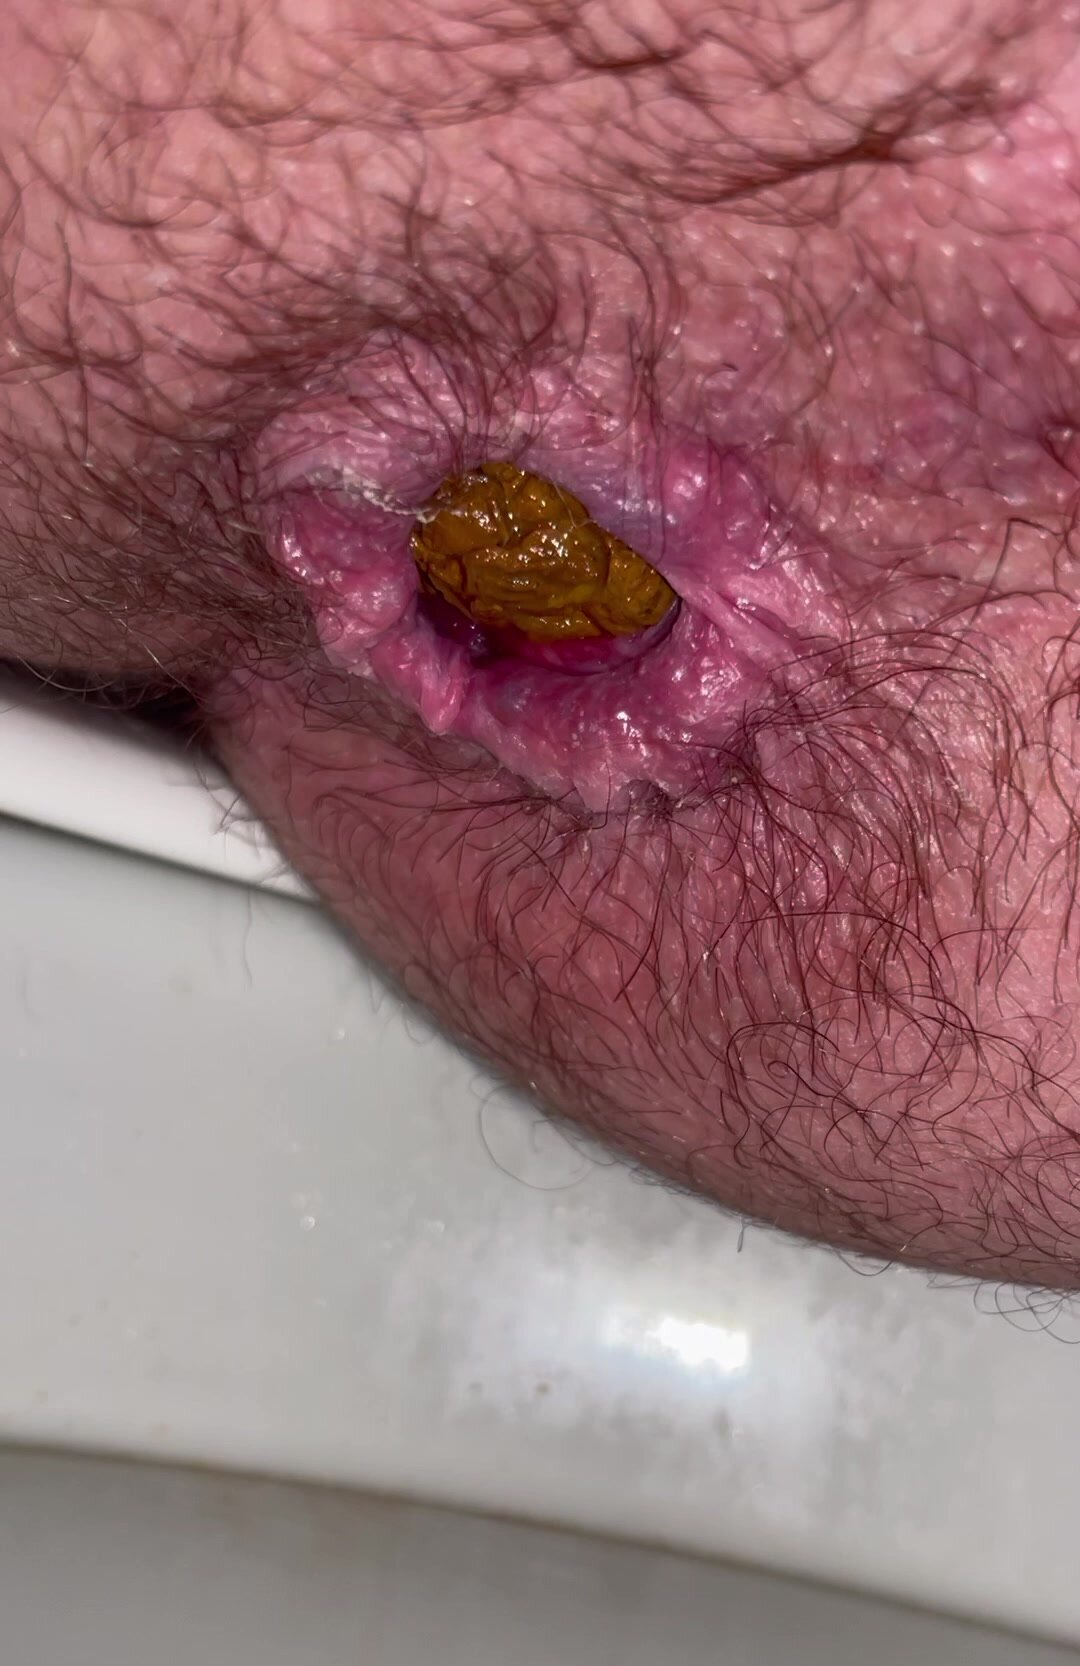 Dirty hairy hole release